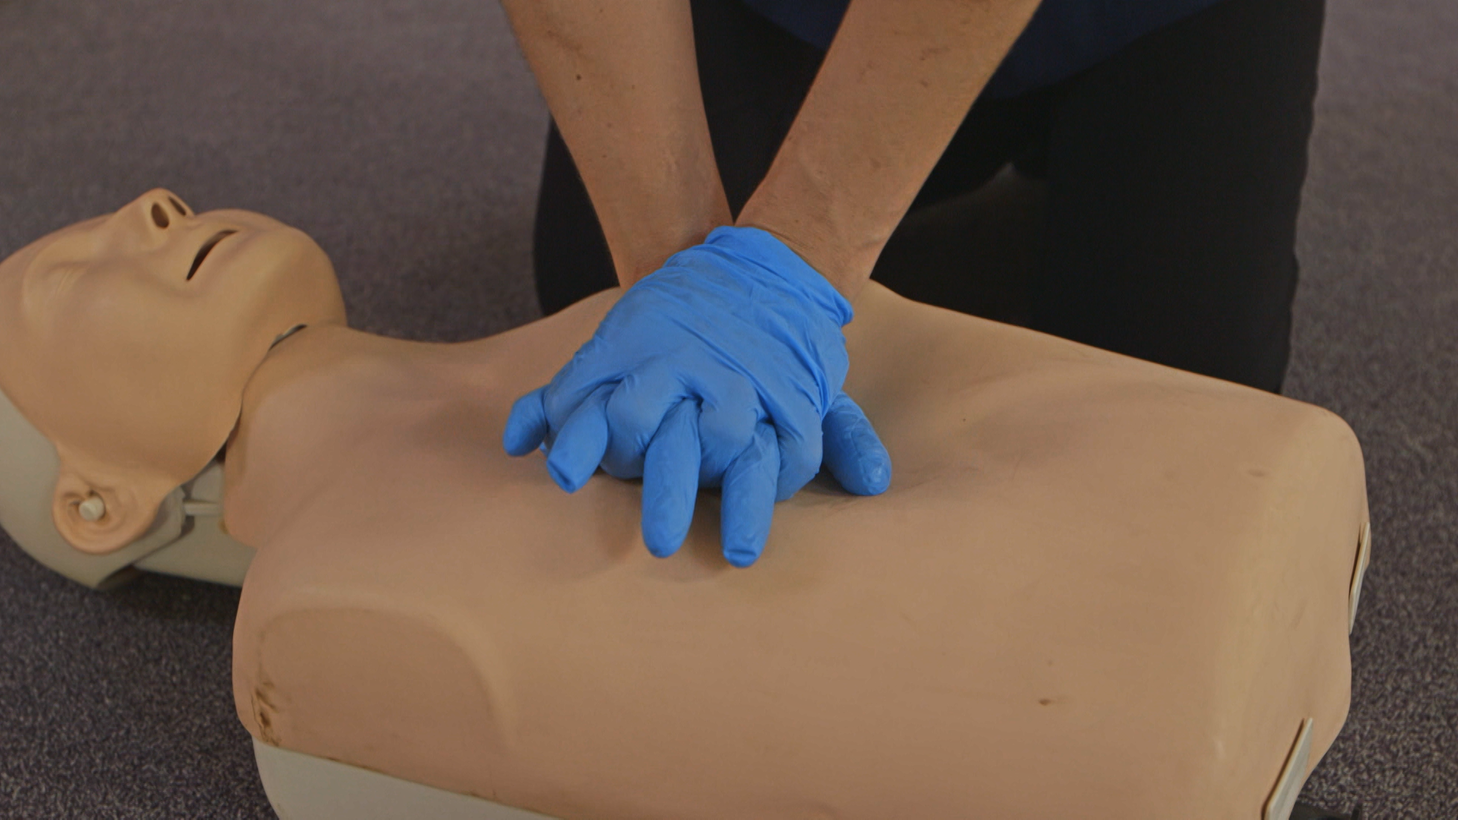 <h1>Emergency First Aid for Care Workers</h1>